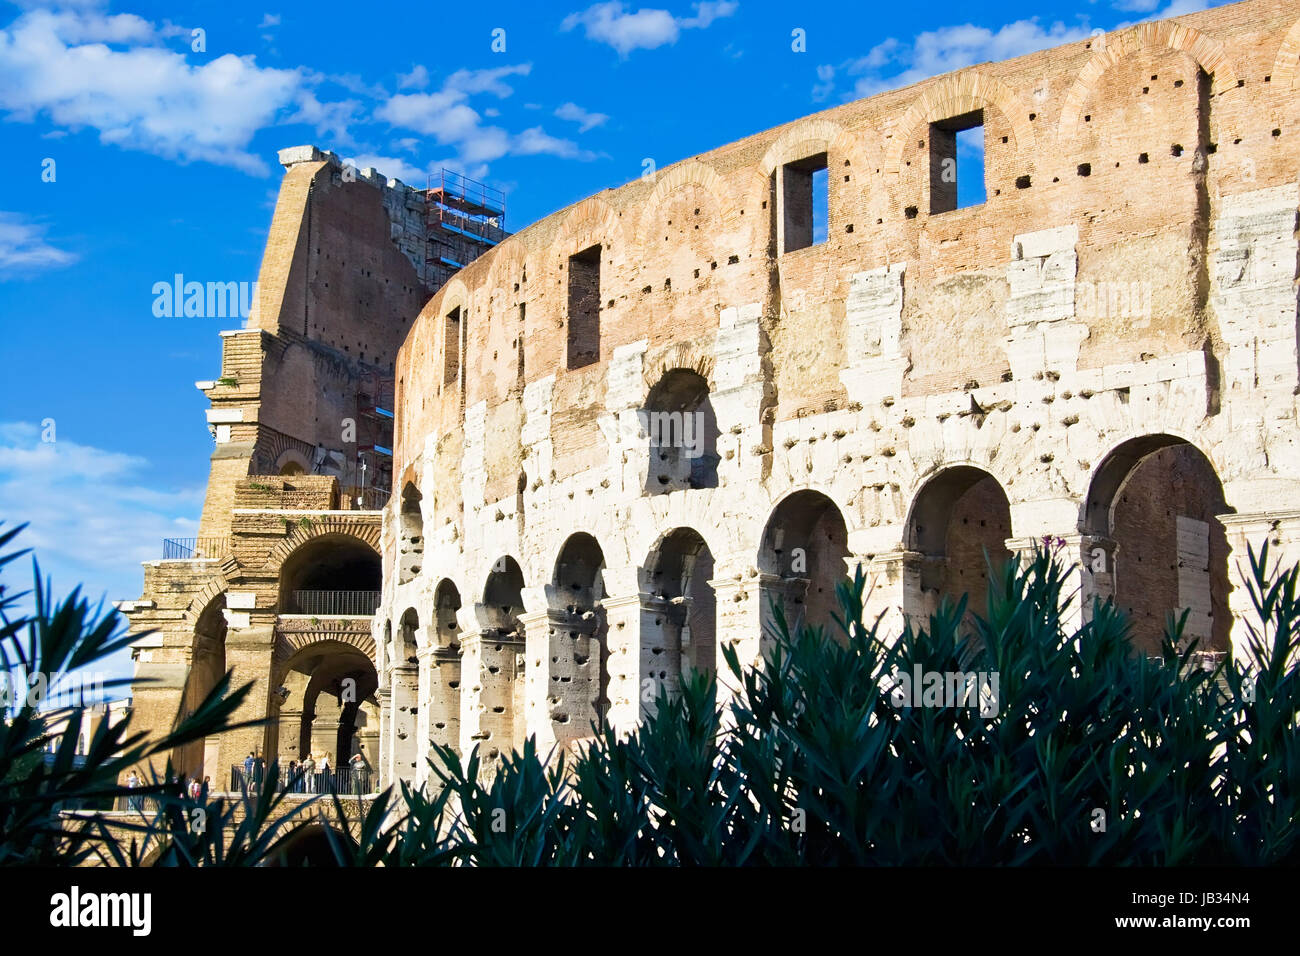 Ancient Walls of great roman amphitheater Colosseum in Rome, Italy Stock Photo